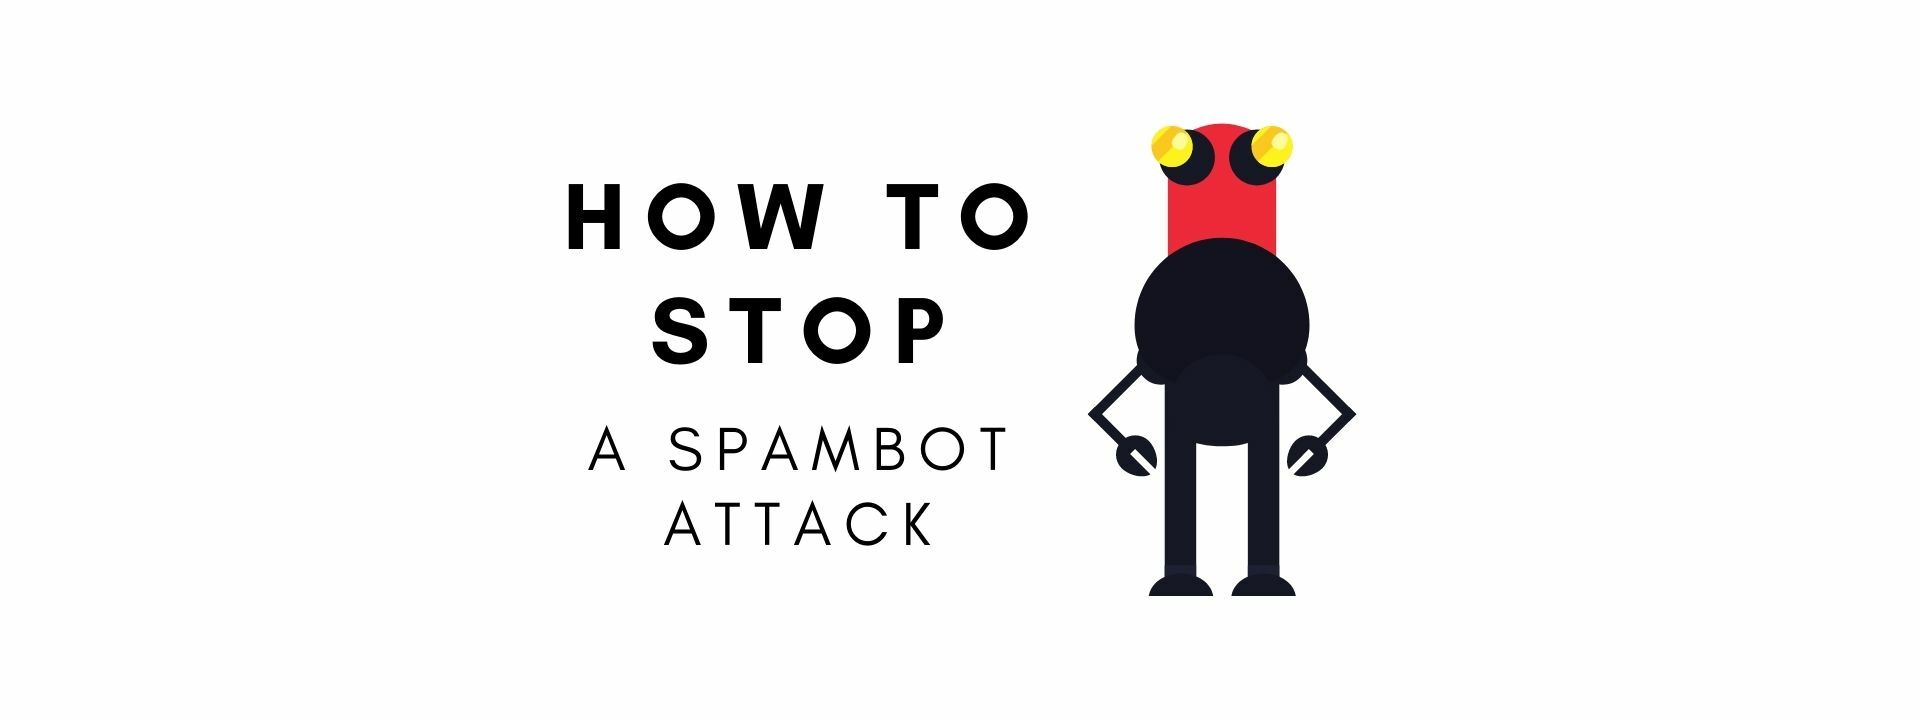 identify and stop spambot attack